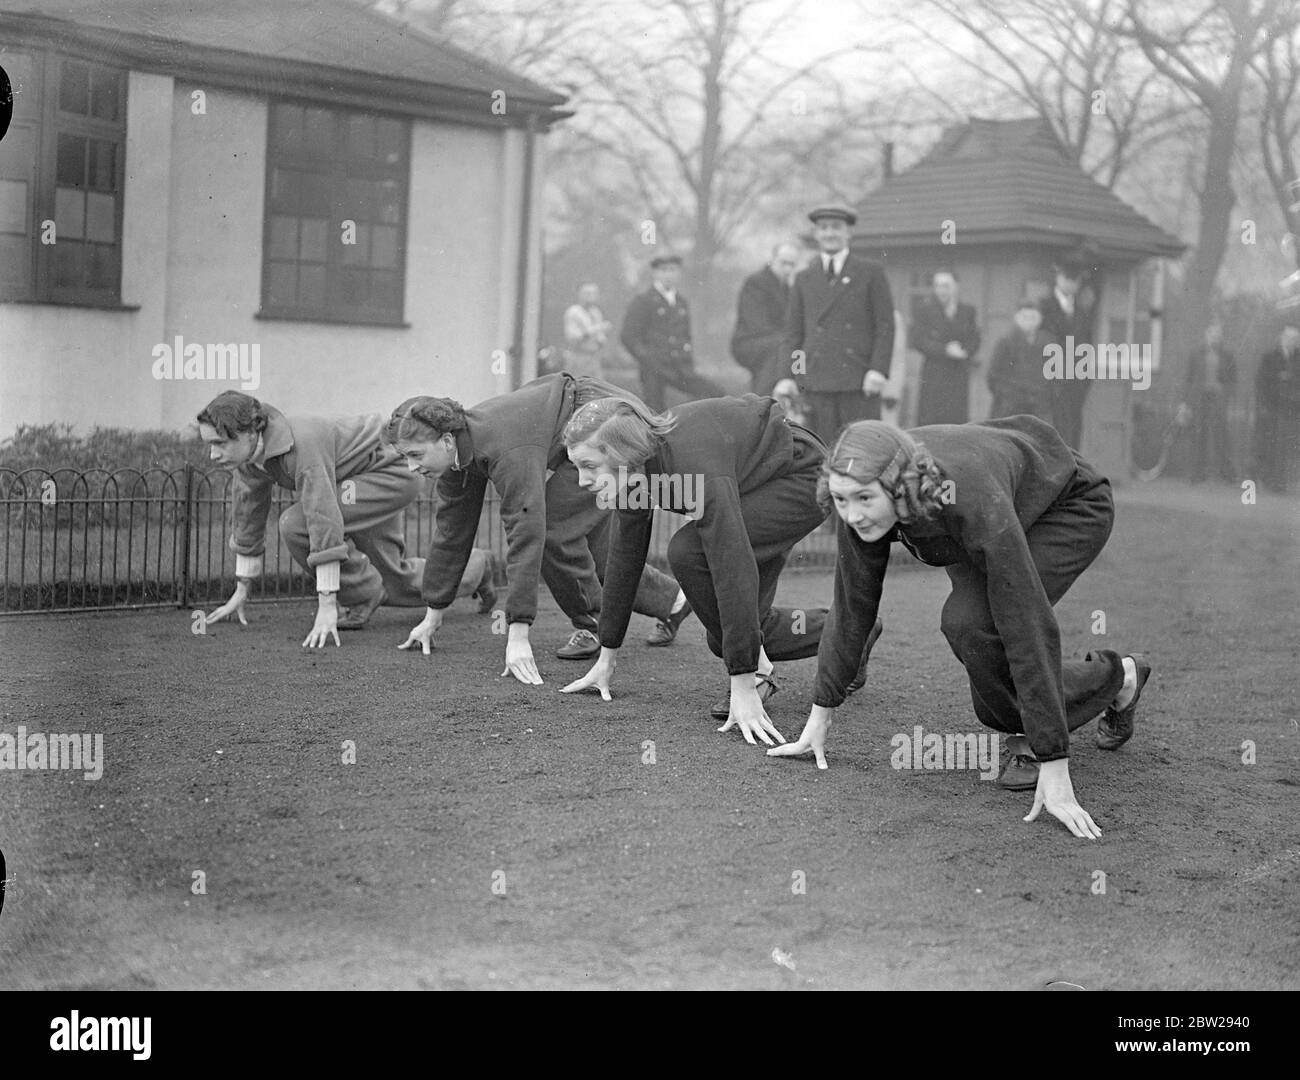 'Starting' to keep warm-girl athletes defy gloomy Sunday whether in London. Despite cold and mist, hardy girl members of the Victoria Park Ladies Athletic Club had the Sunday practice in Victoria Park. Photo shows, members of the Victoria Park Ladies Athletic Club, wearing long trousers instead of shorts, practising starts in Victoria Park. 28 November 1937 Stock Photo